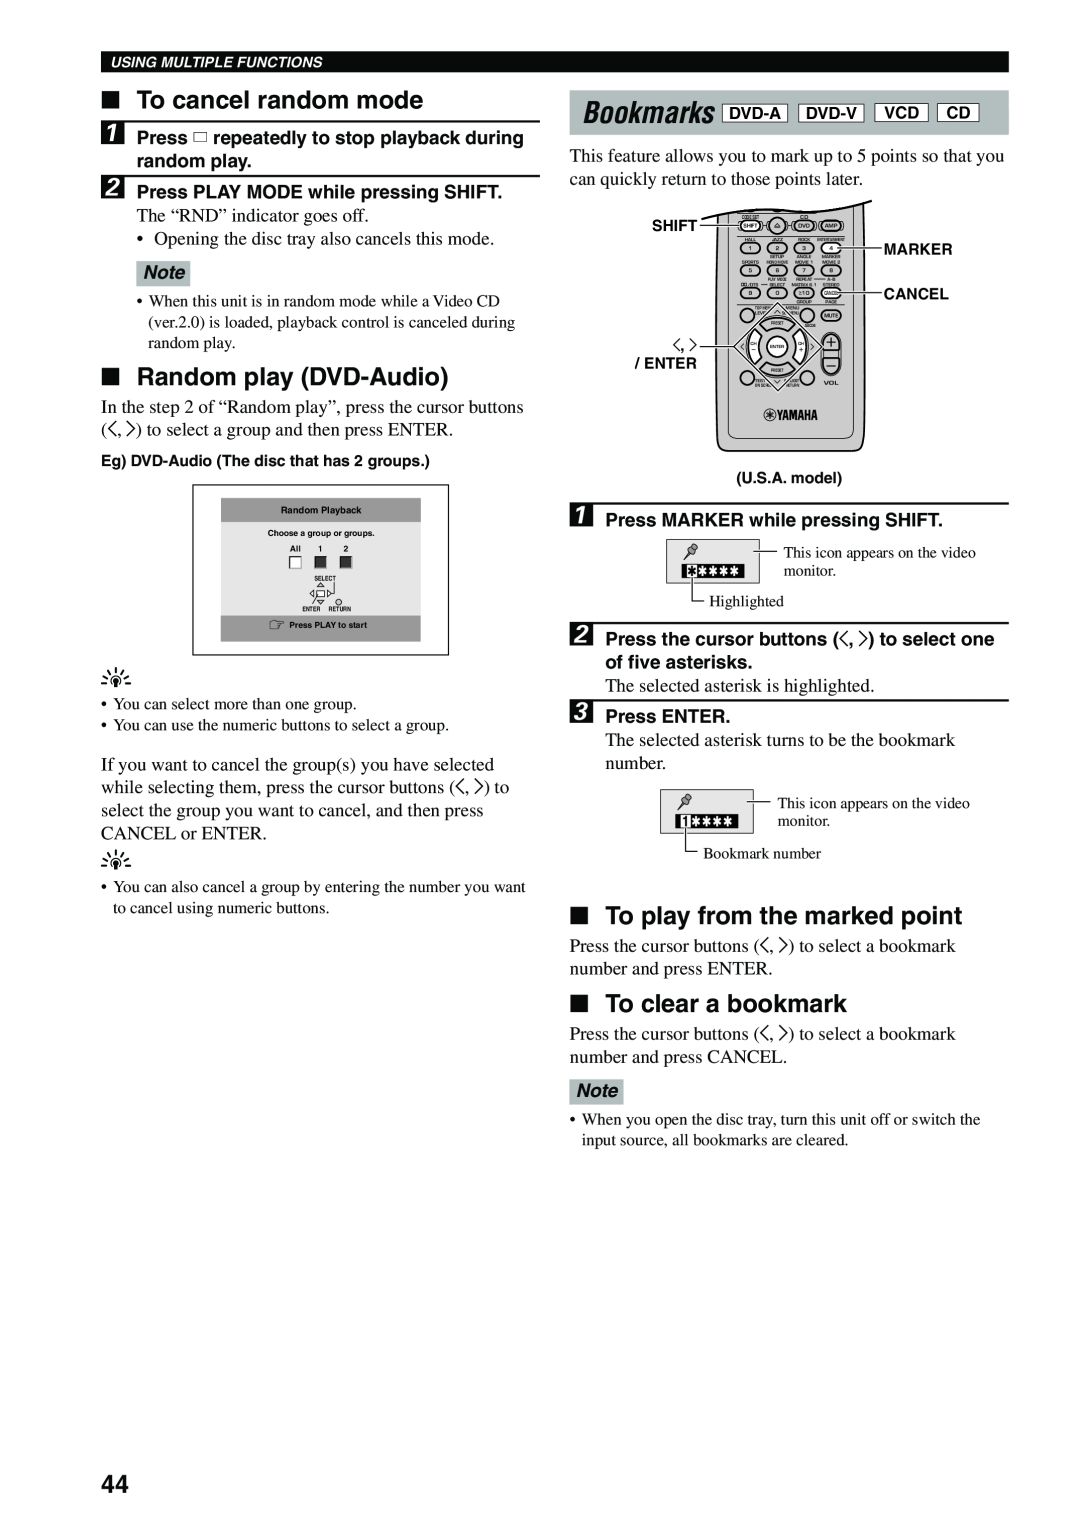 Yamaha DVX-S100 To cancel random mode, Random play DVD-Audio, To play from the marked point, To clear a bookmark 